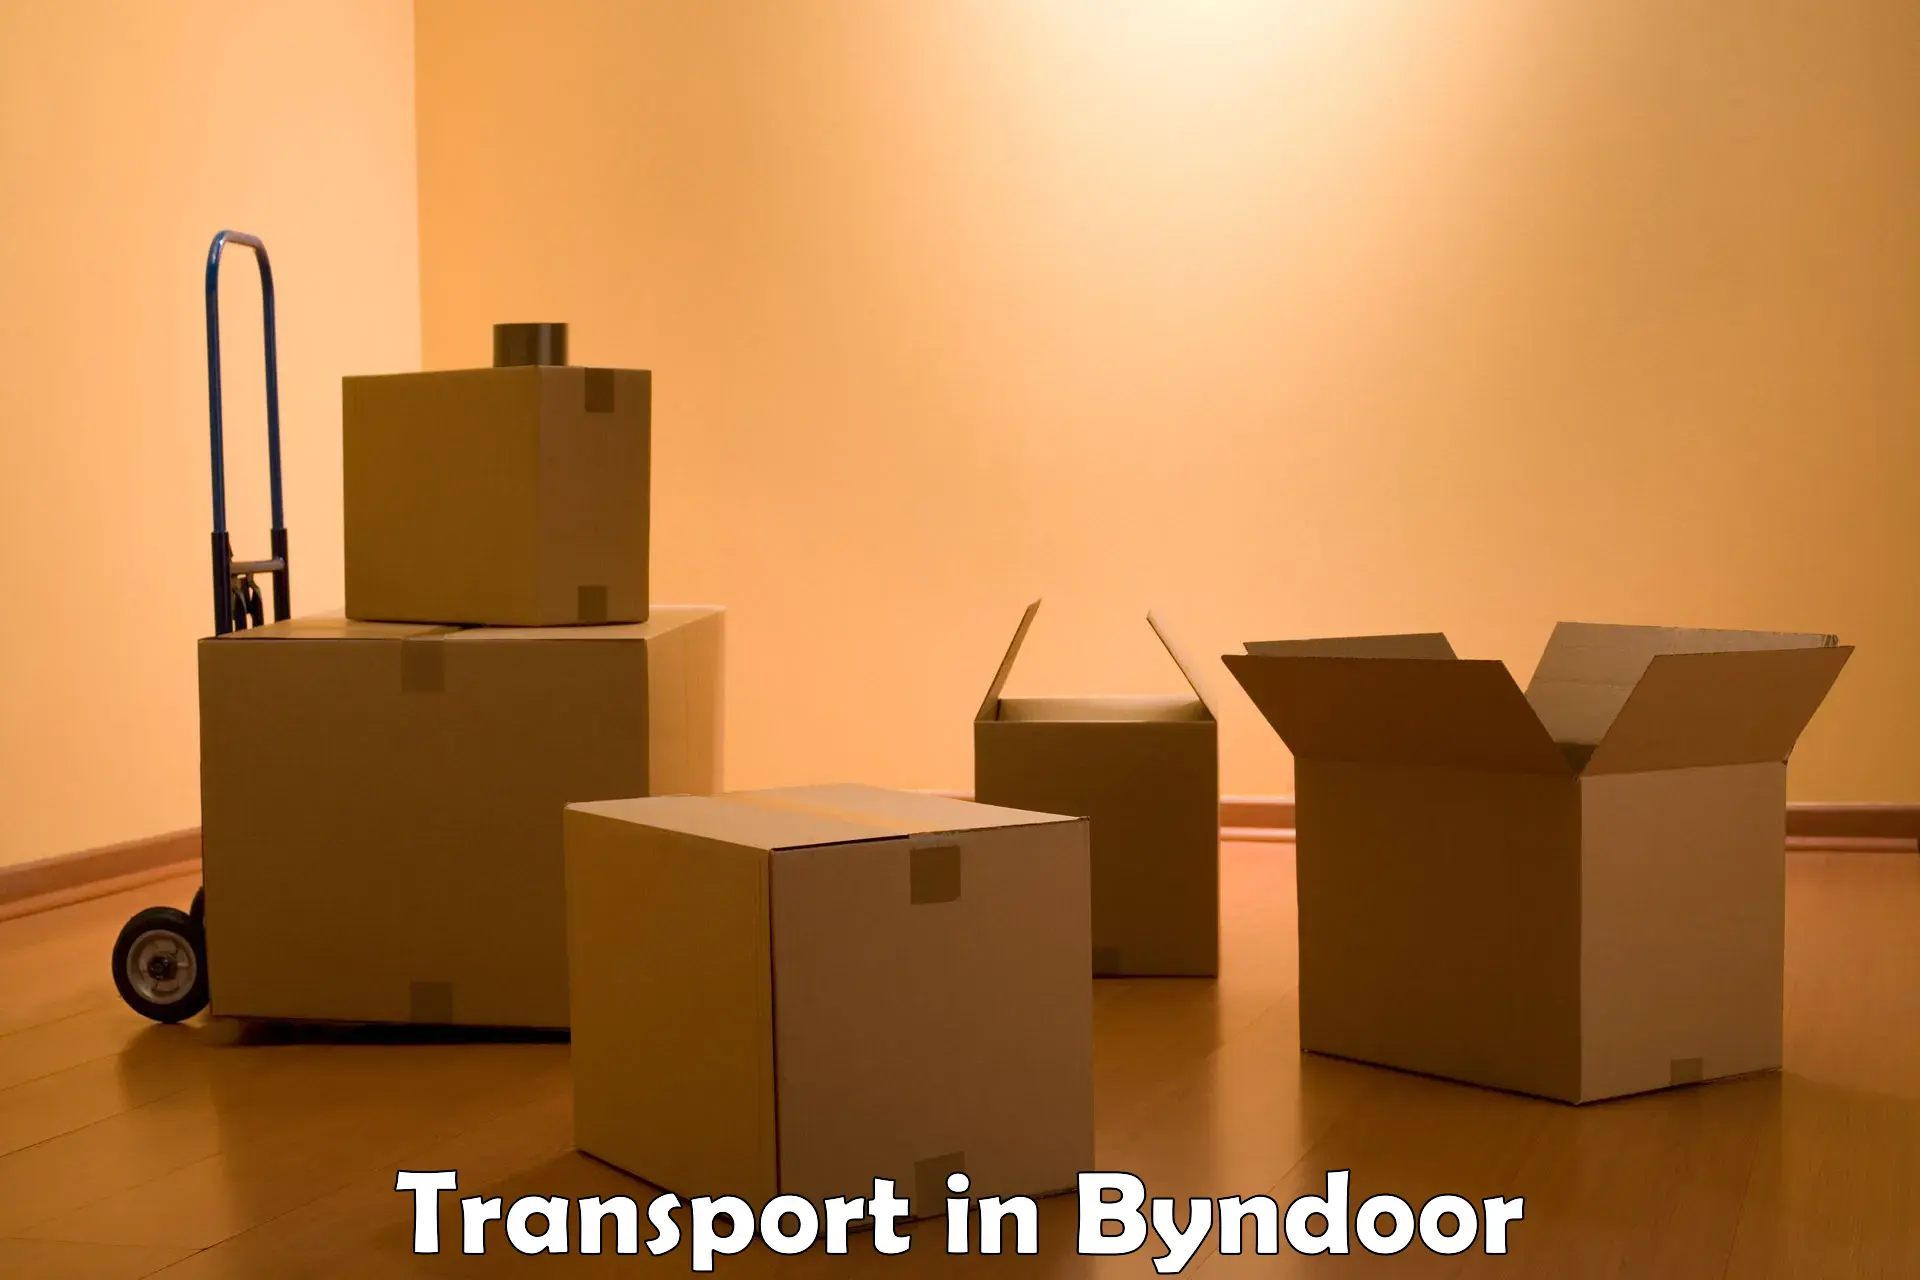 Vehicle transport services in Byndoor